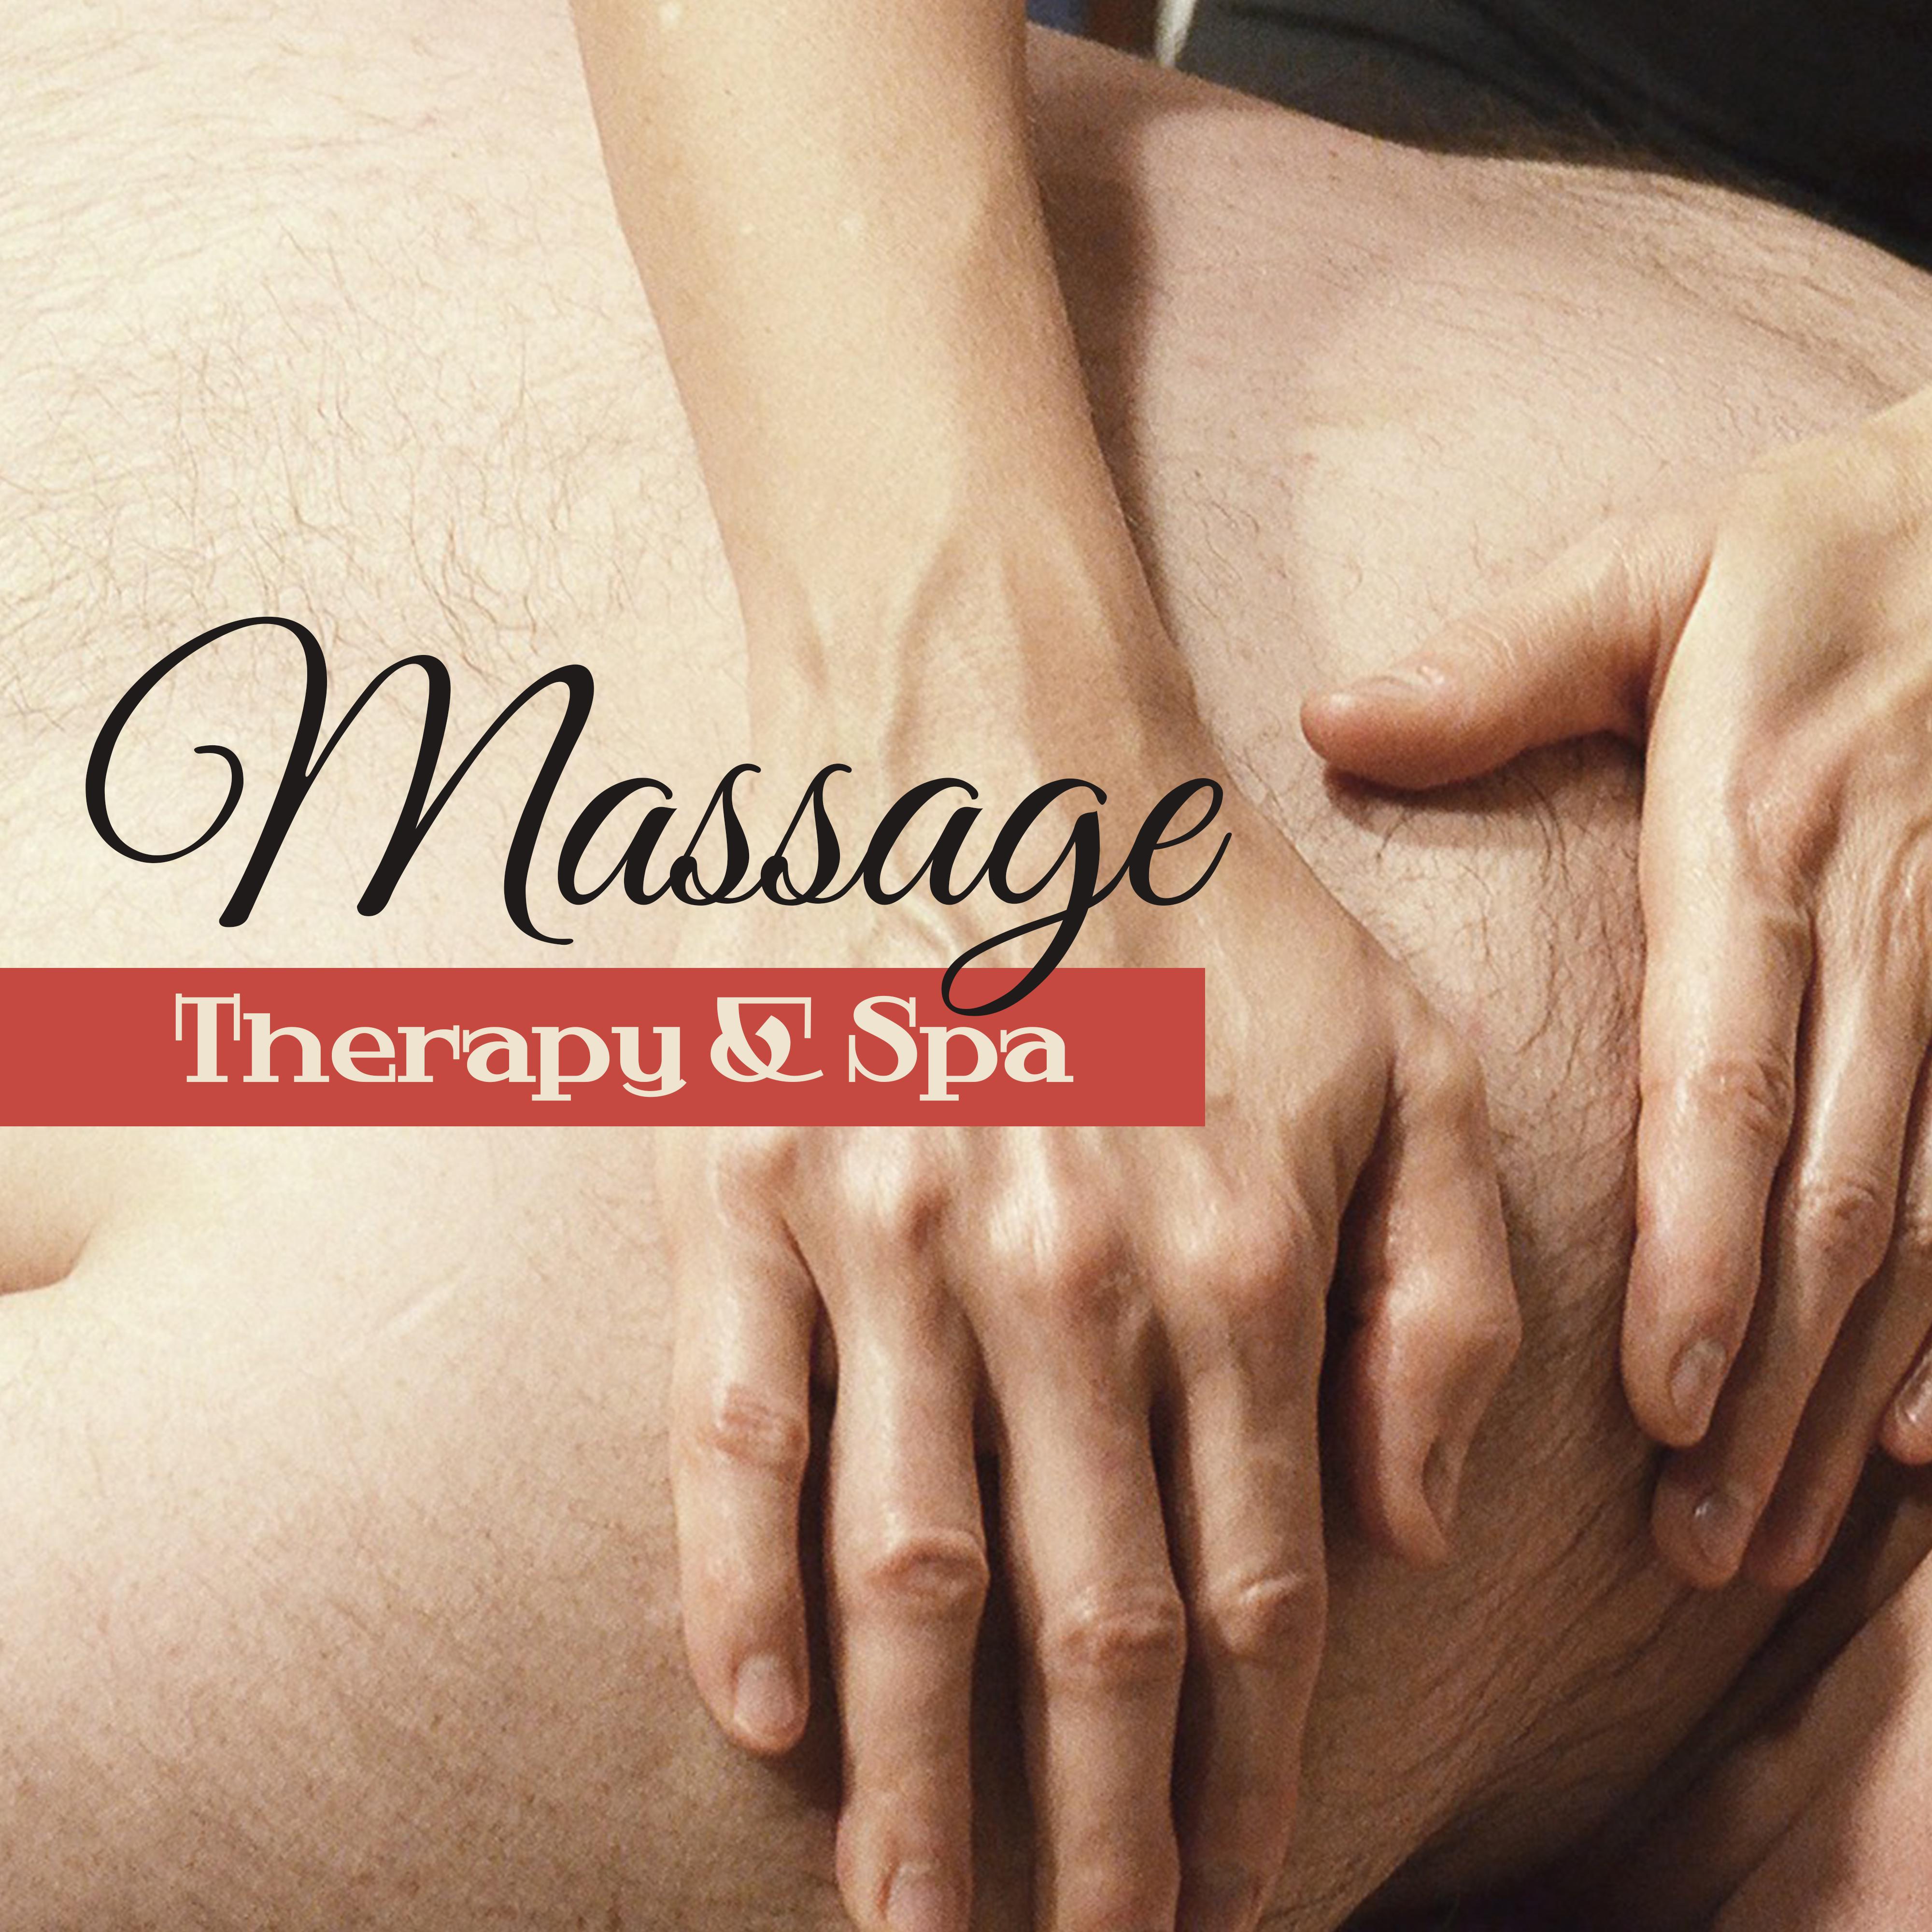 Massage Therapy & Spa – Oriental Melodies to Rest, Pure Relaxation, Deep Sleep, Bliss Spa, Inner Peace